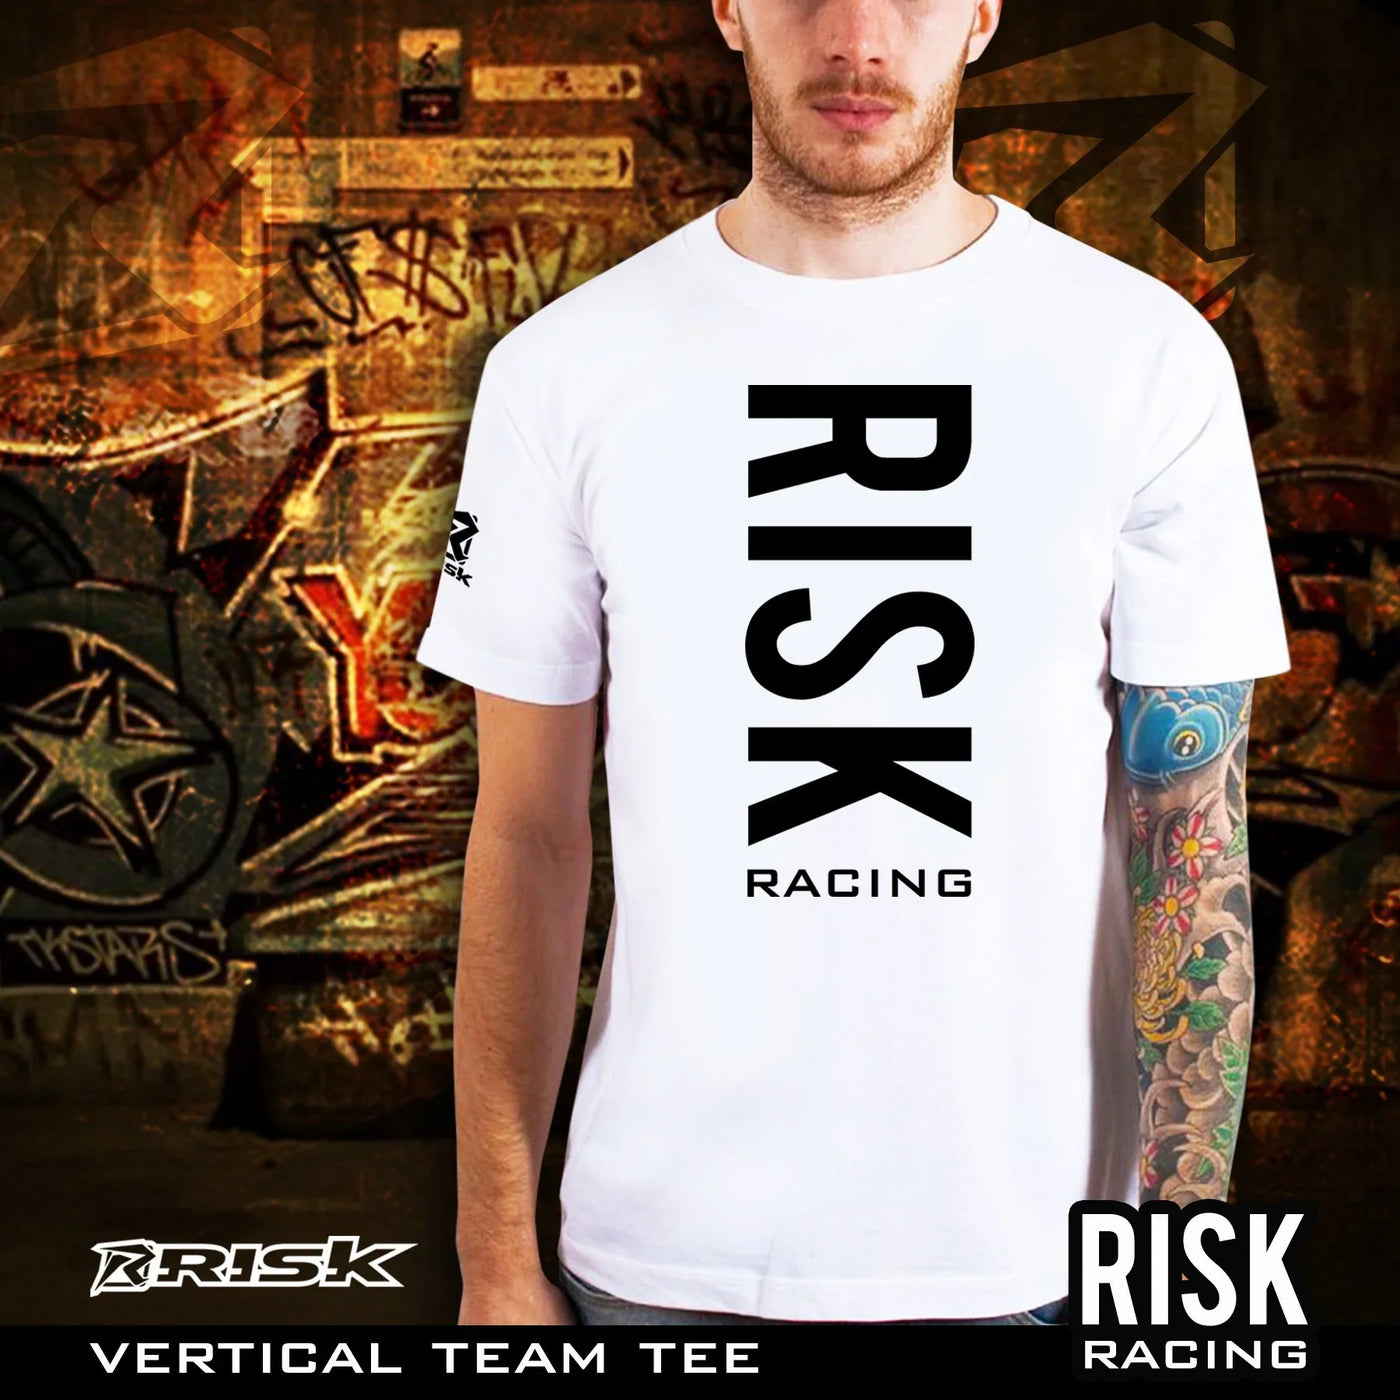 Risk Racing T Shirt - Vertical, Large